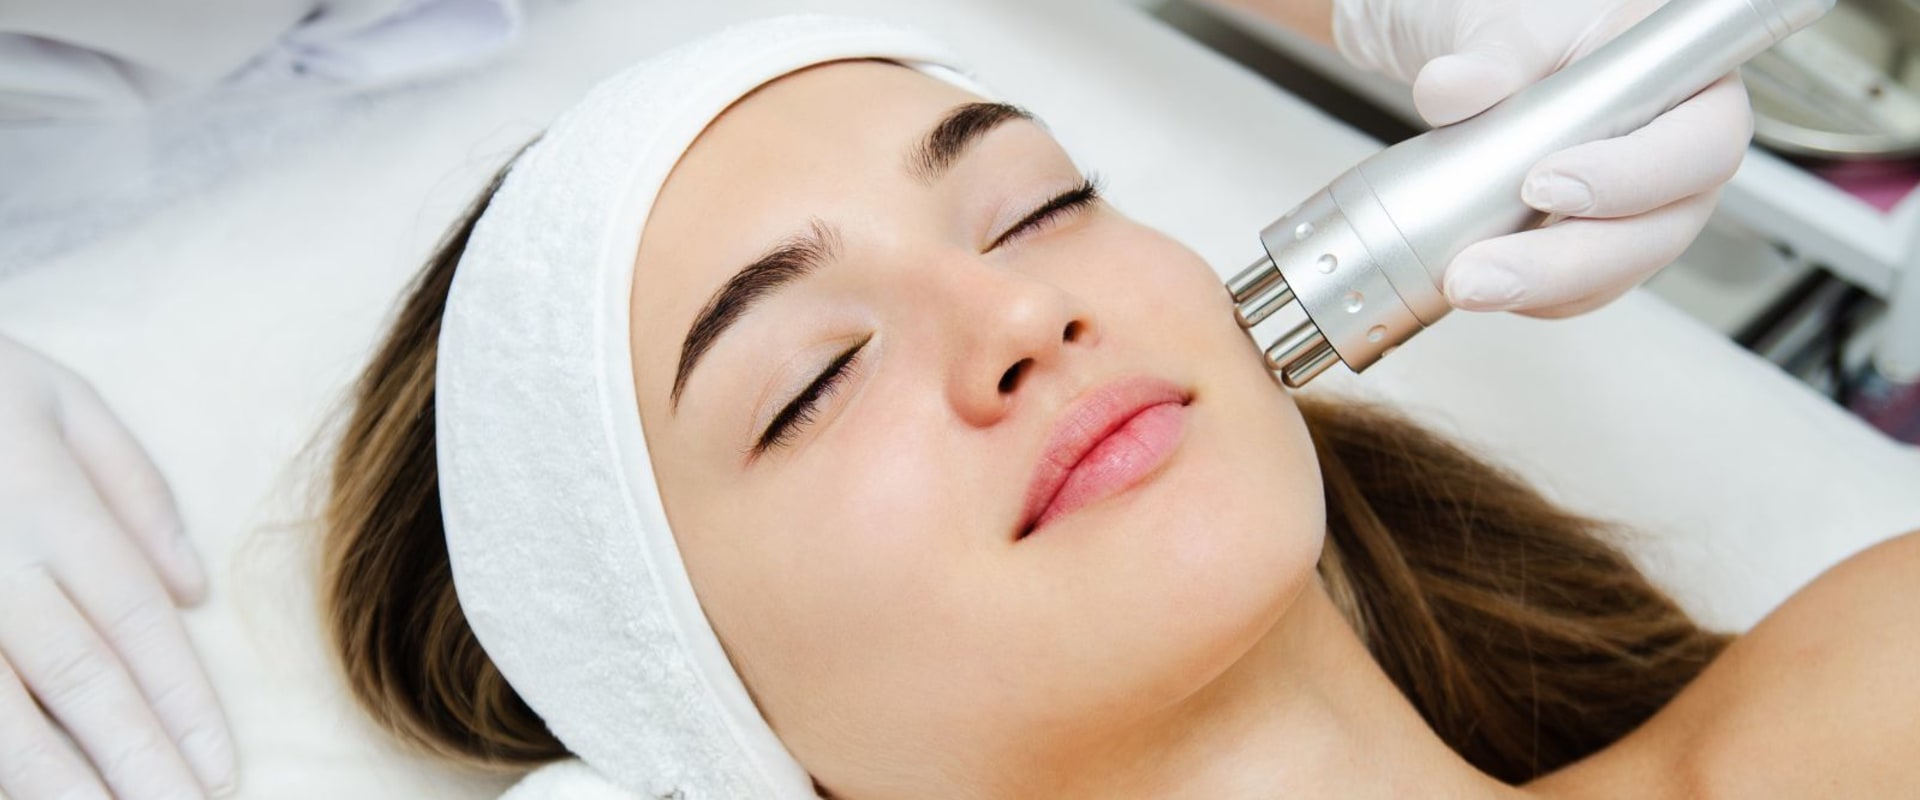 What to Expect During a Cosmetic Treatment Consultation